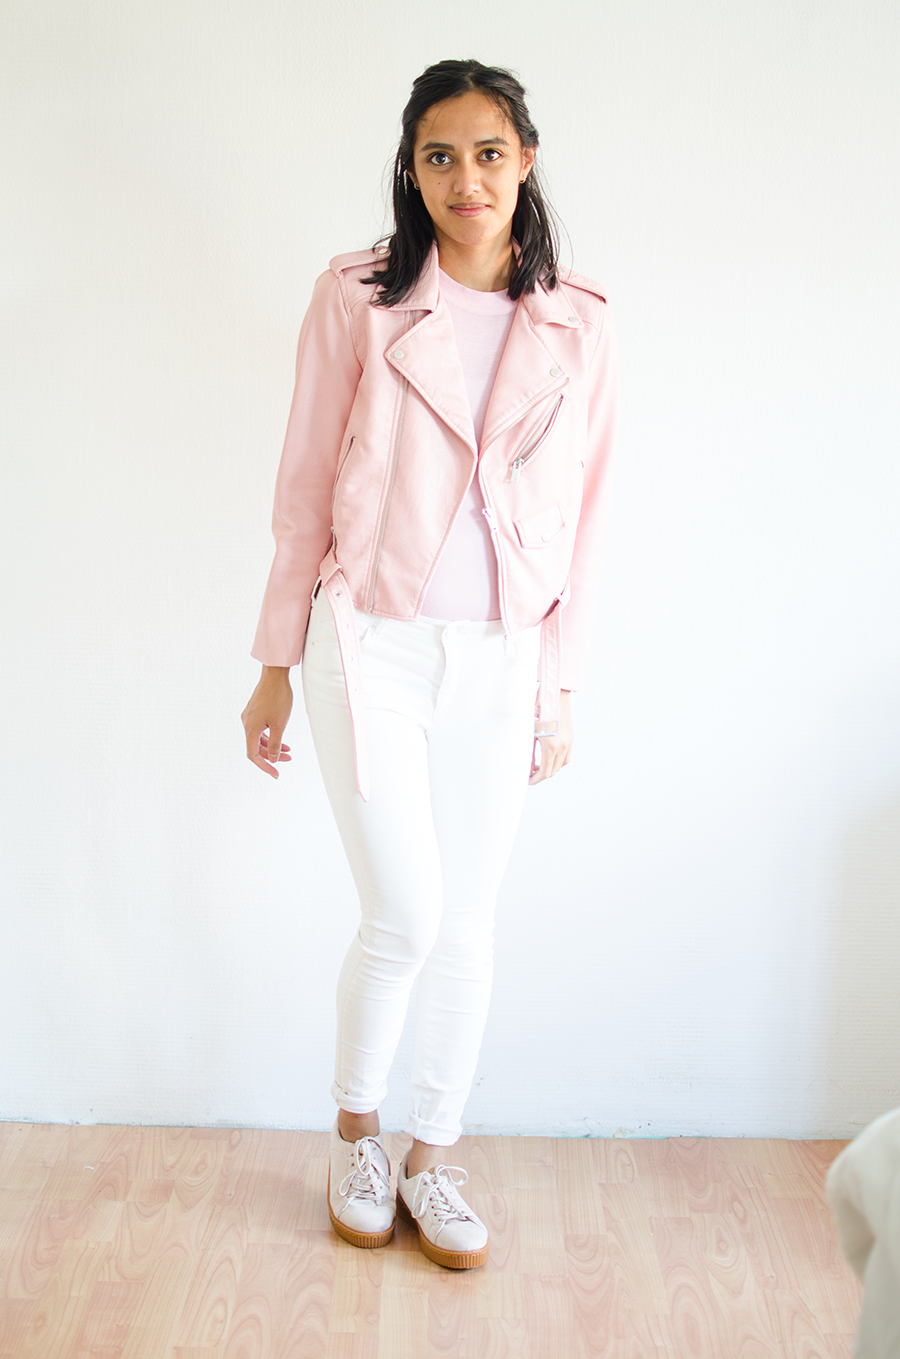 How to style pink jacket